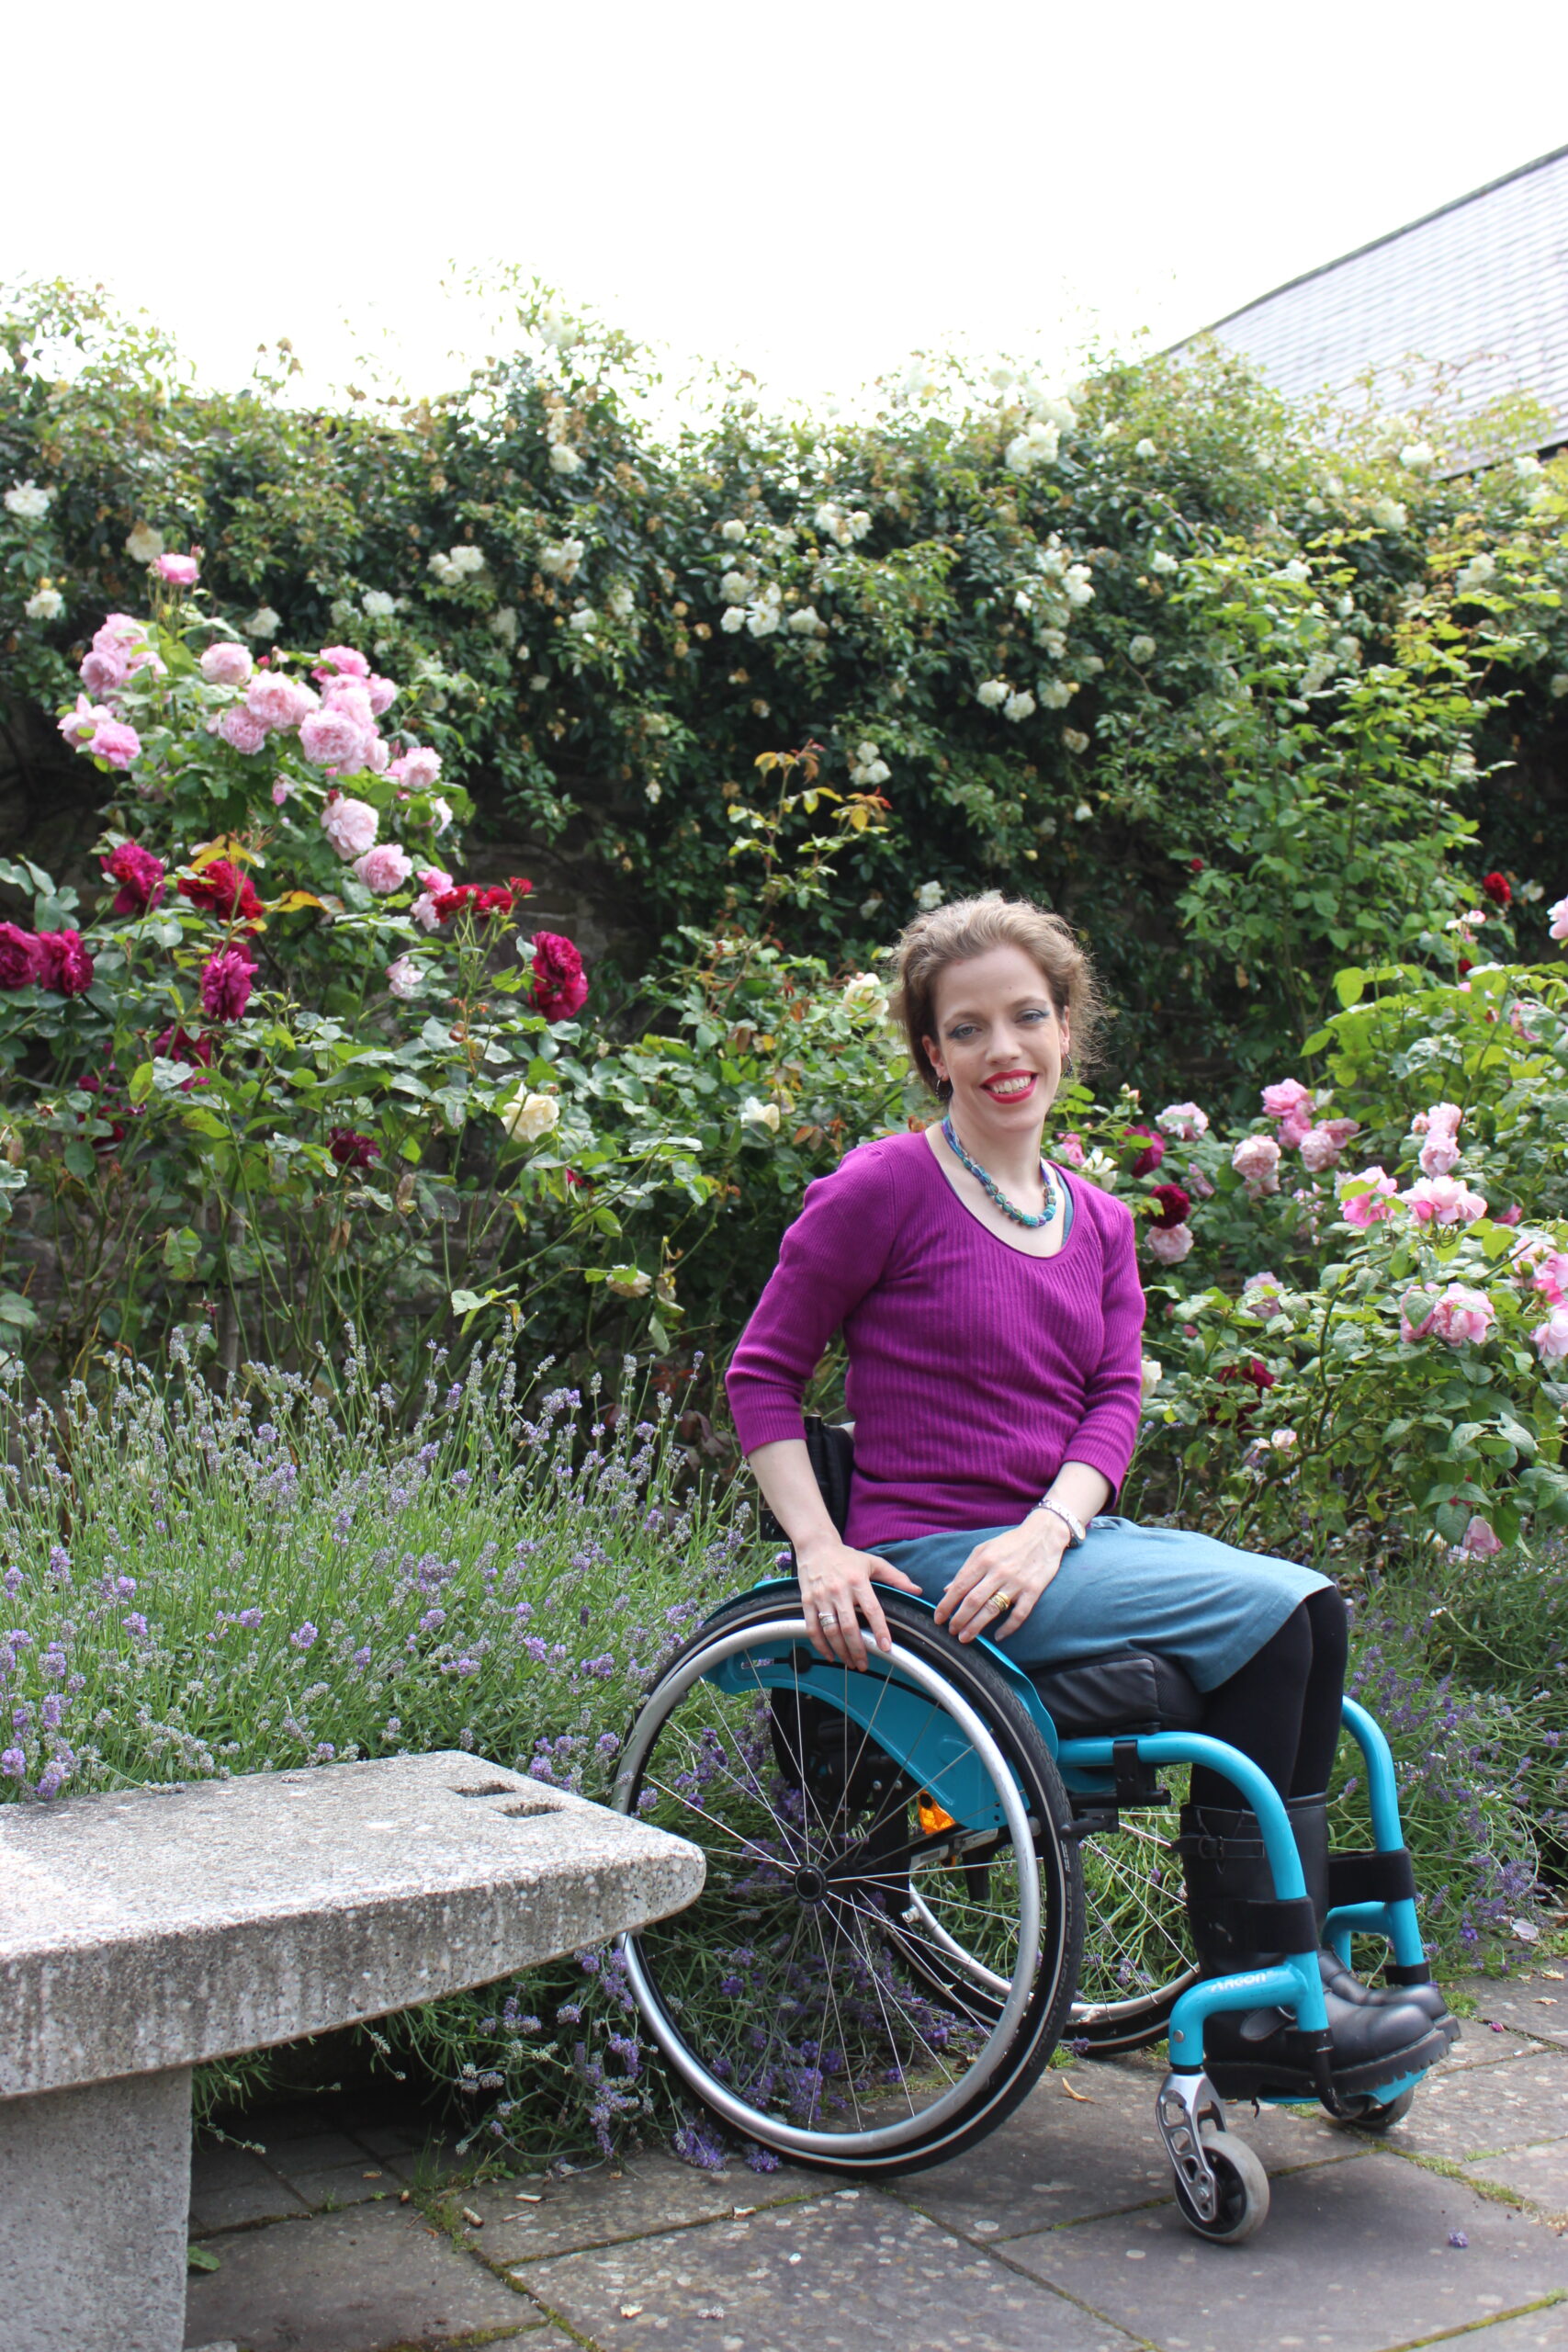 Grace sitting in her teal wheelchair in front of roses in bloom wearing a pink jumper and a teal skirt.